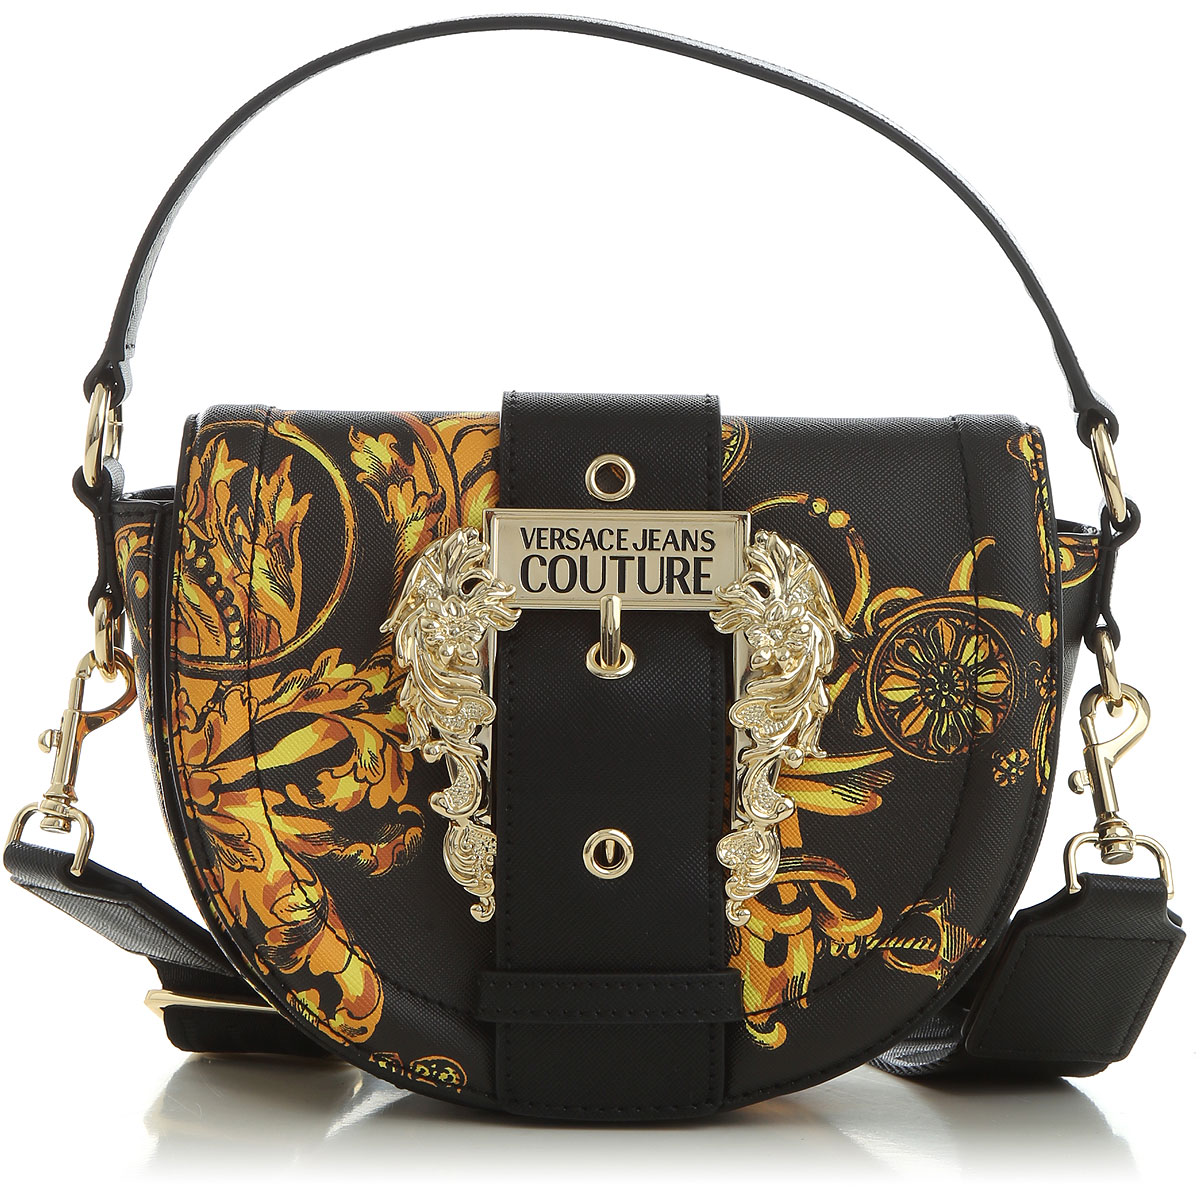 Handbags Versace Jeans Couture , Style code: 71va4bf2-71880-g89